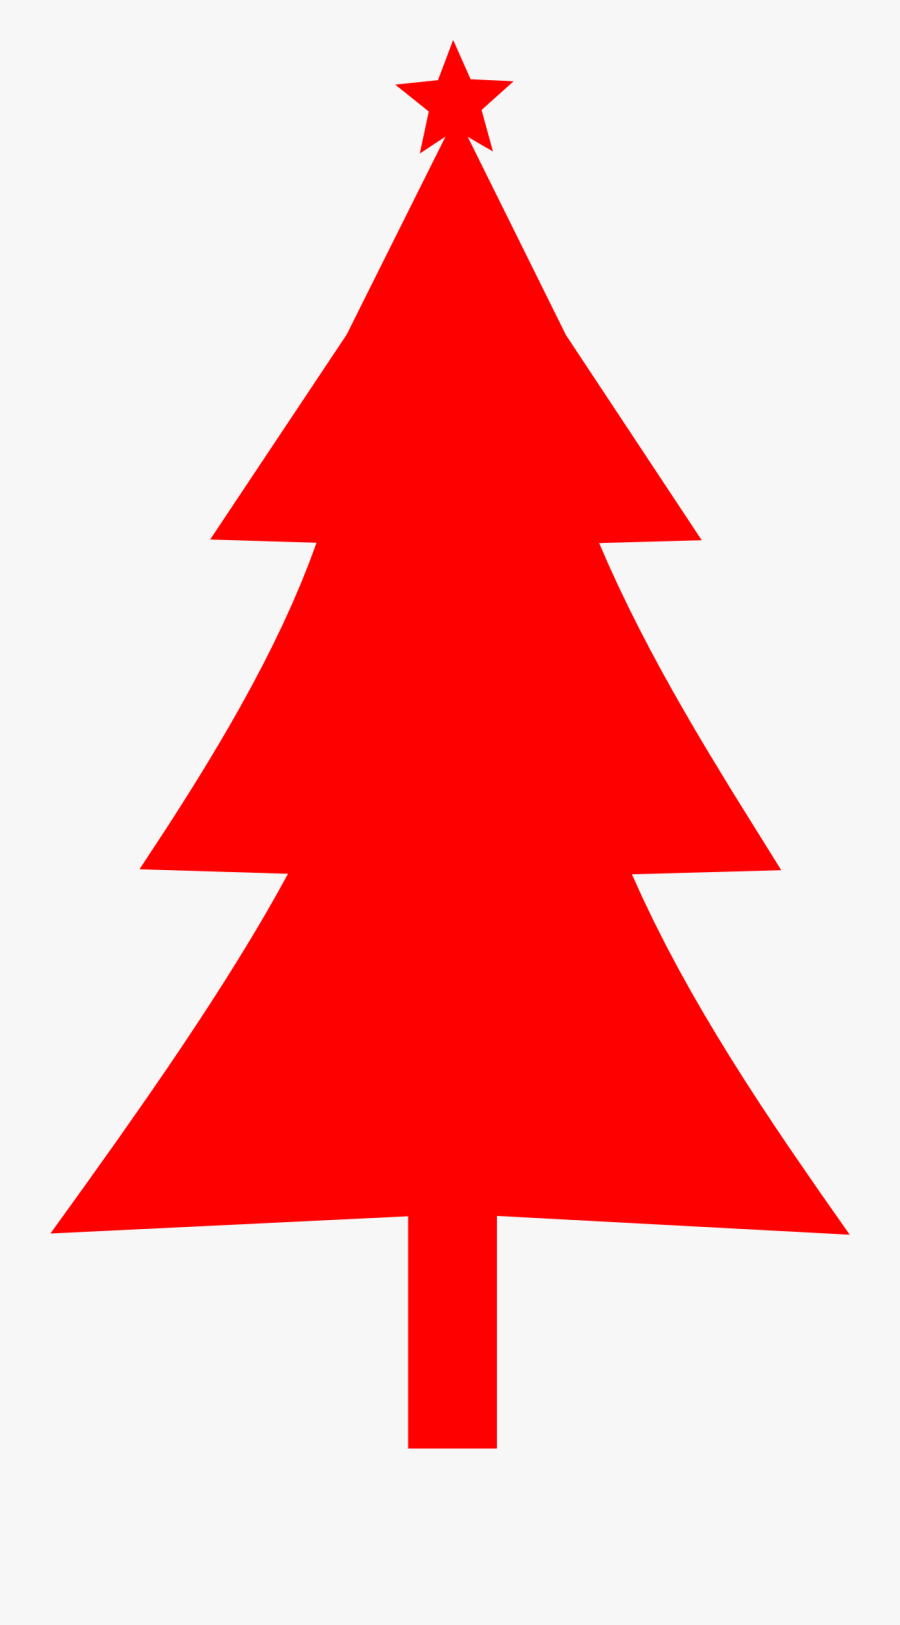 Clip Art Red Christmas Tree , Png Download - Clip Art Red Christmas Tree, Transparent Clipart